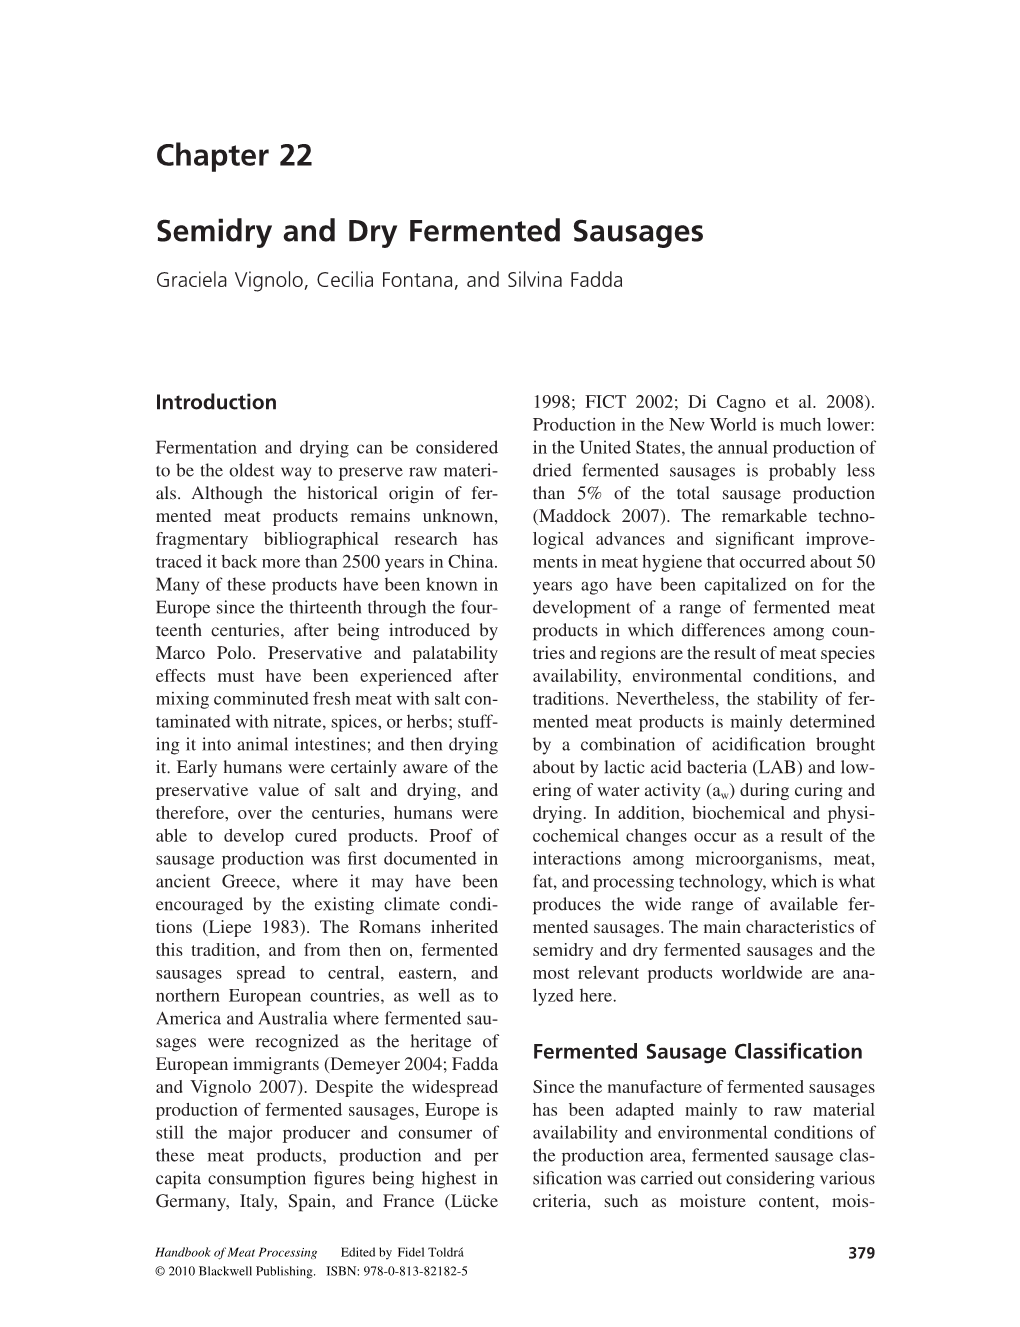 Chapter 22 Semidry and Dry Fermented Sausages